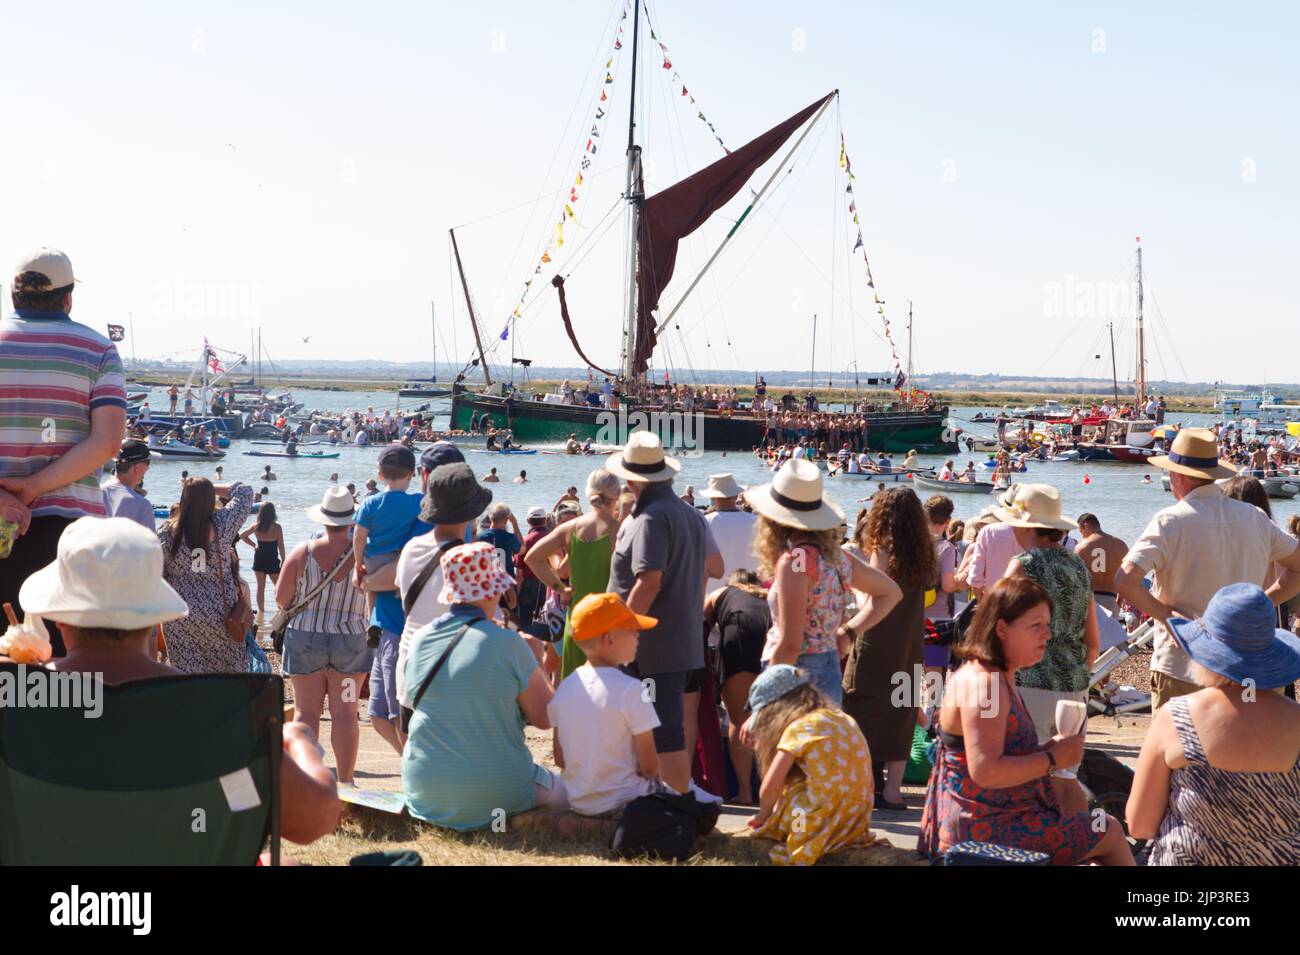 West Mersea Town Regatta on Mersea Island in Essex. Crowds enjoying the sunshine as they look out towards the Thames Barge 'Kitty'. Stock Photo